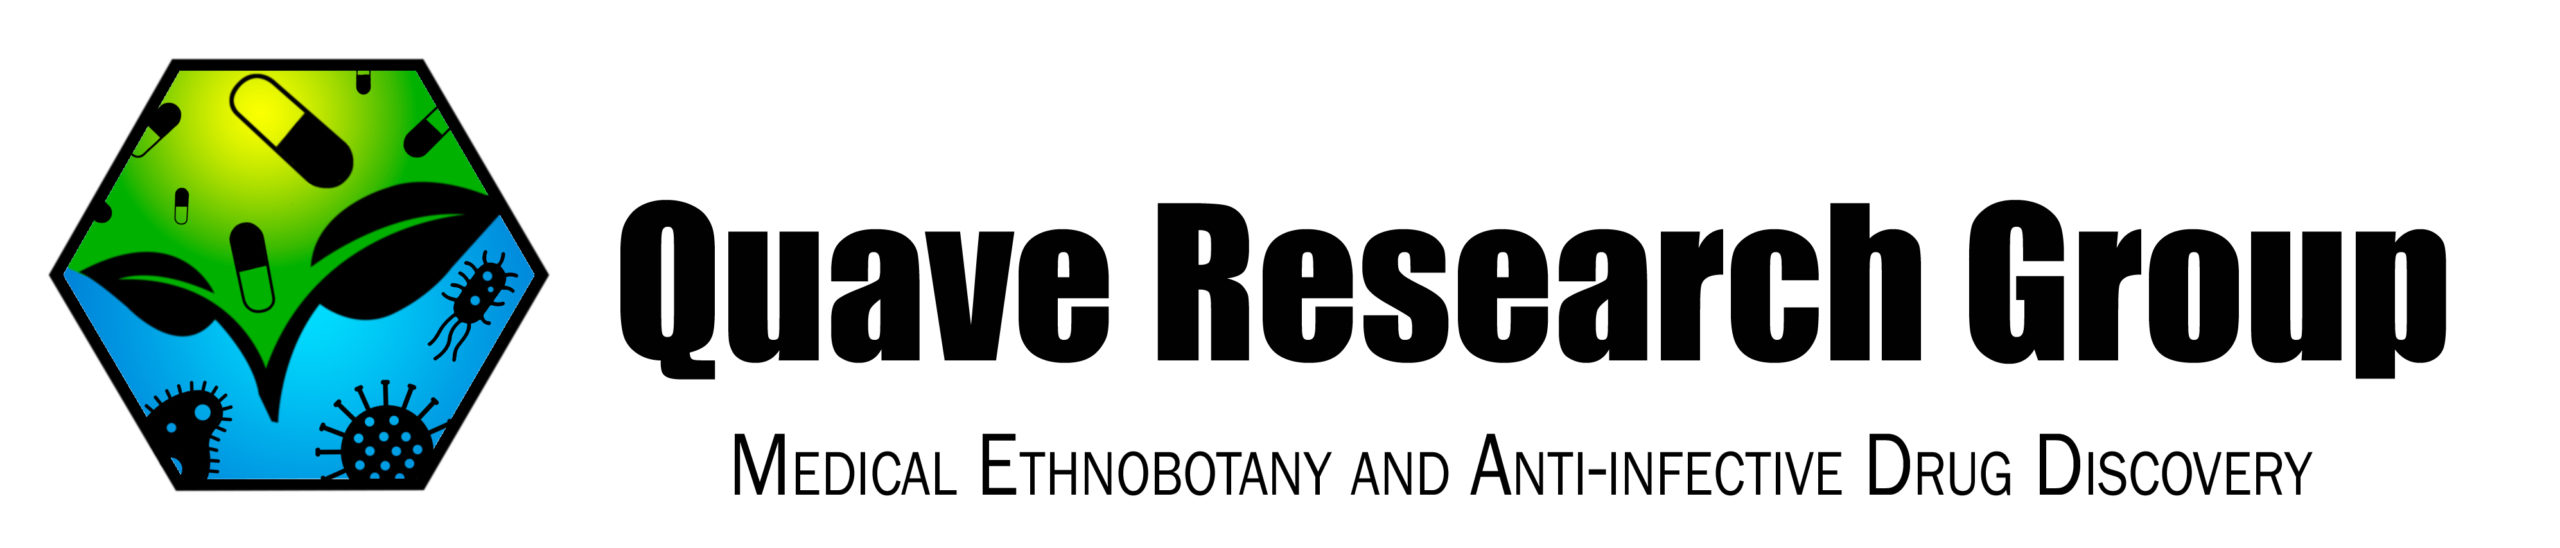 The Quave Research Group 